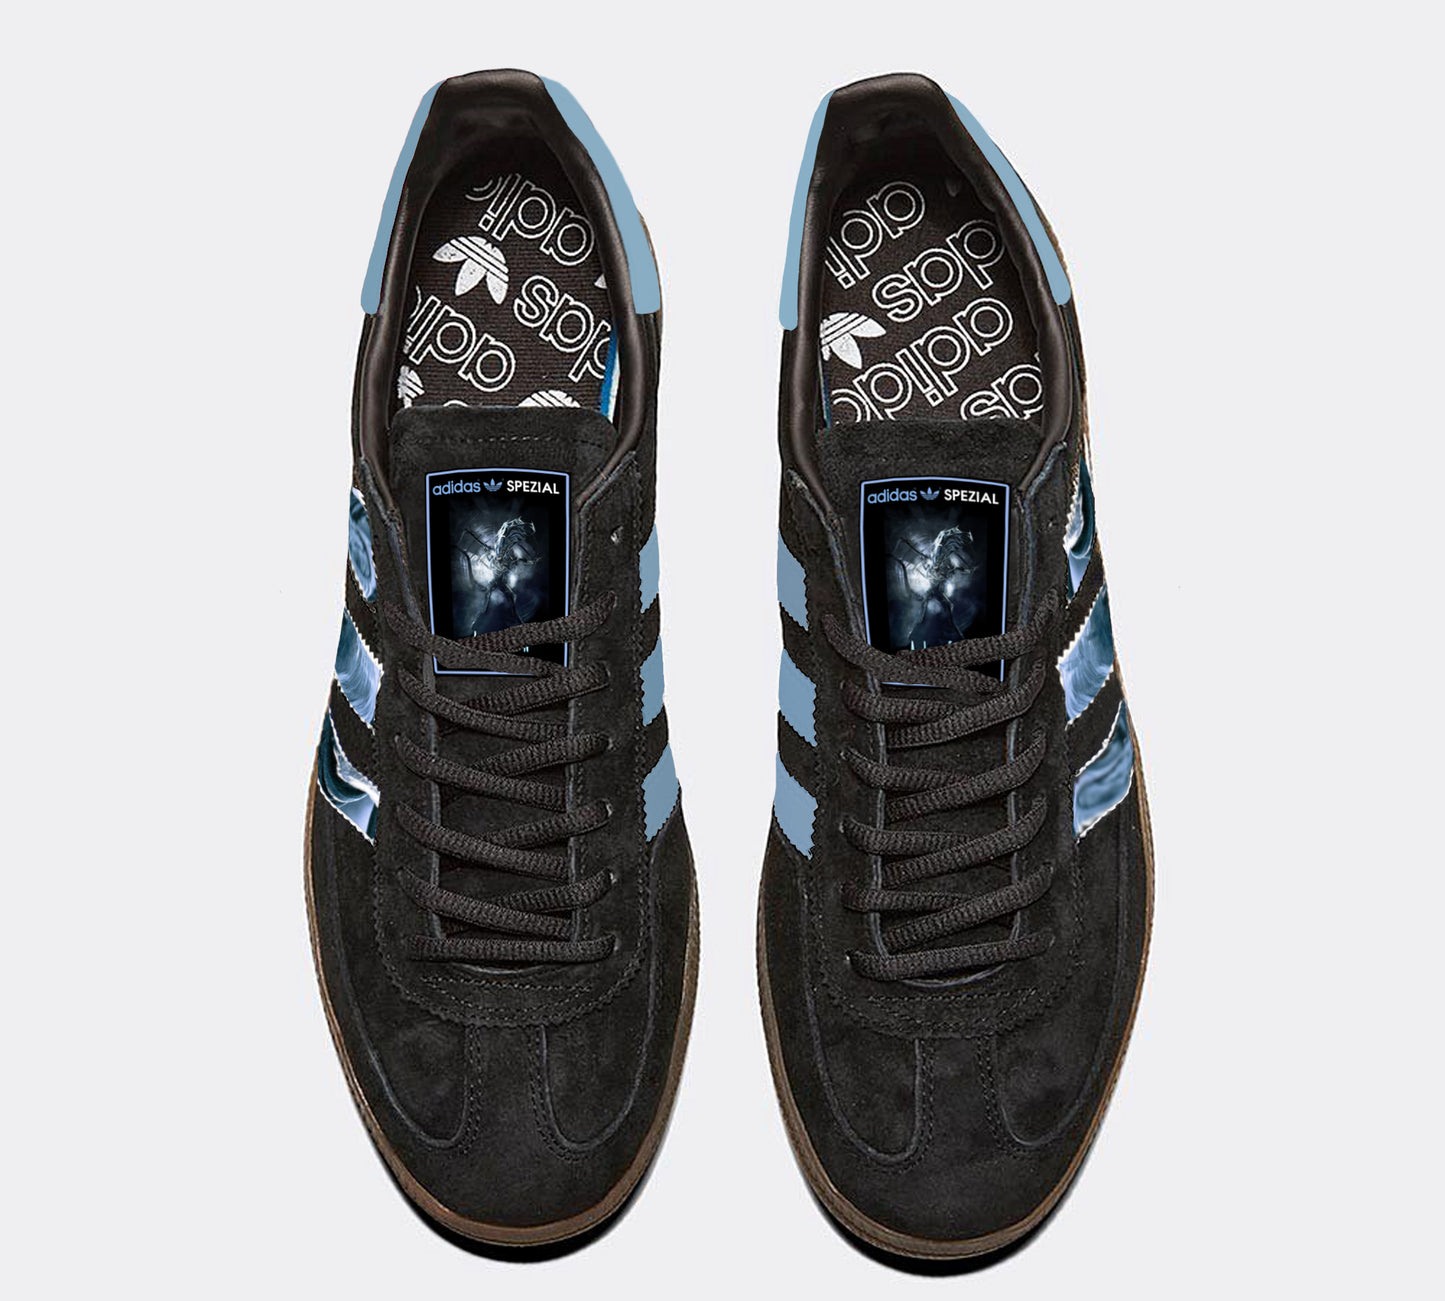 Limited edition Ridley Scotts Aliens inspired black / light blue Adidas Handball Spezial trainers / sneakers